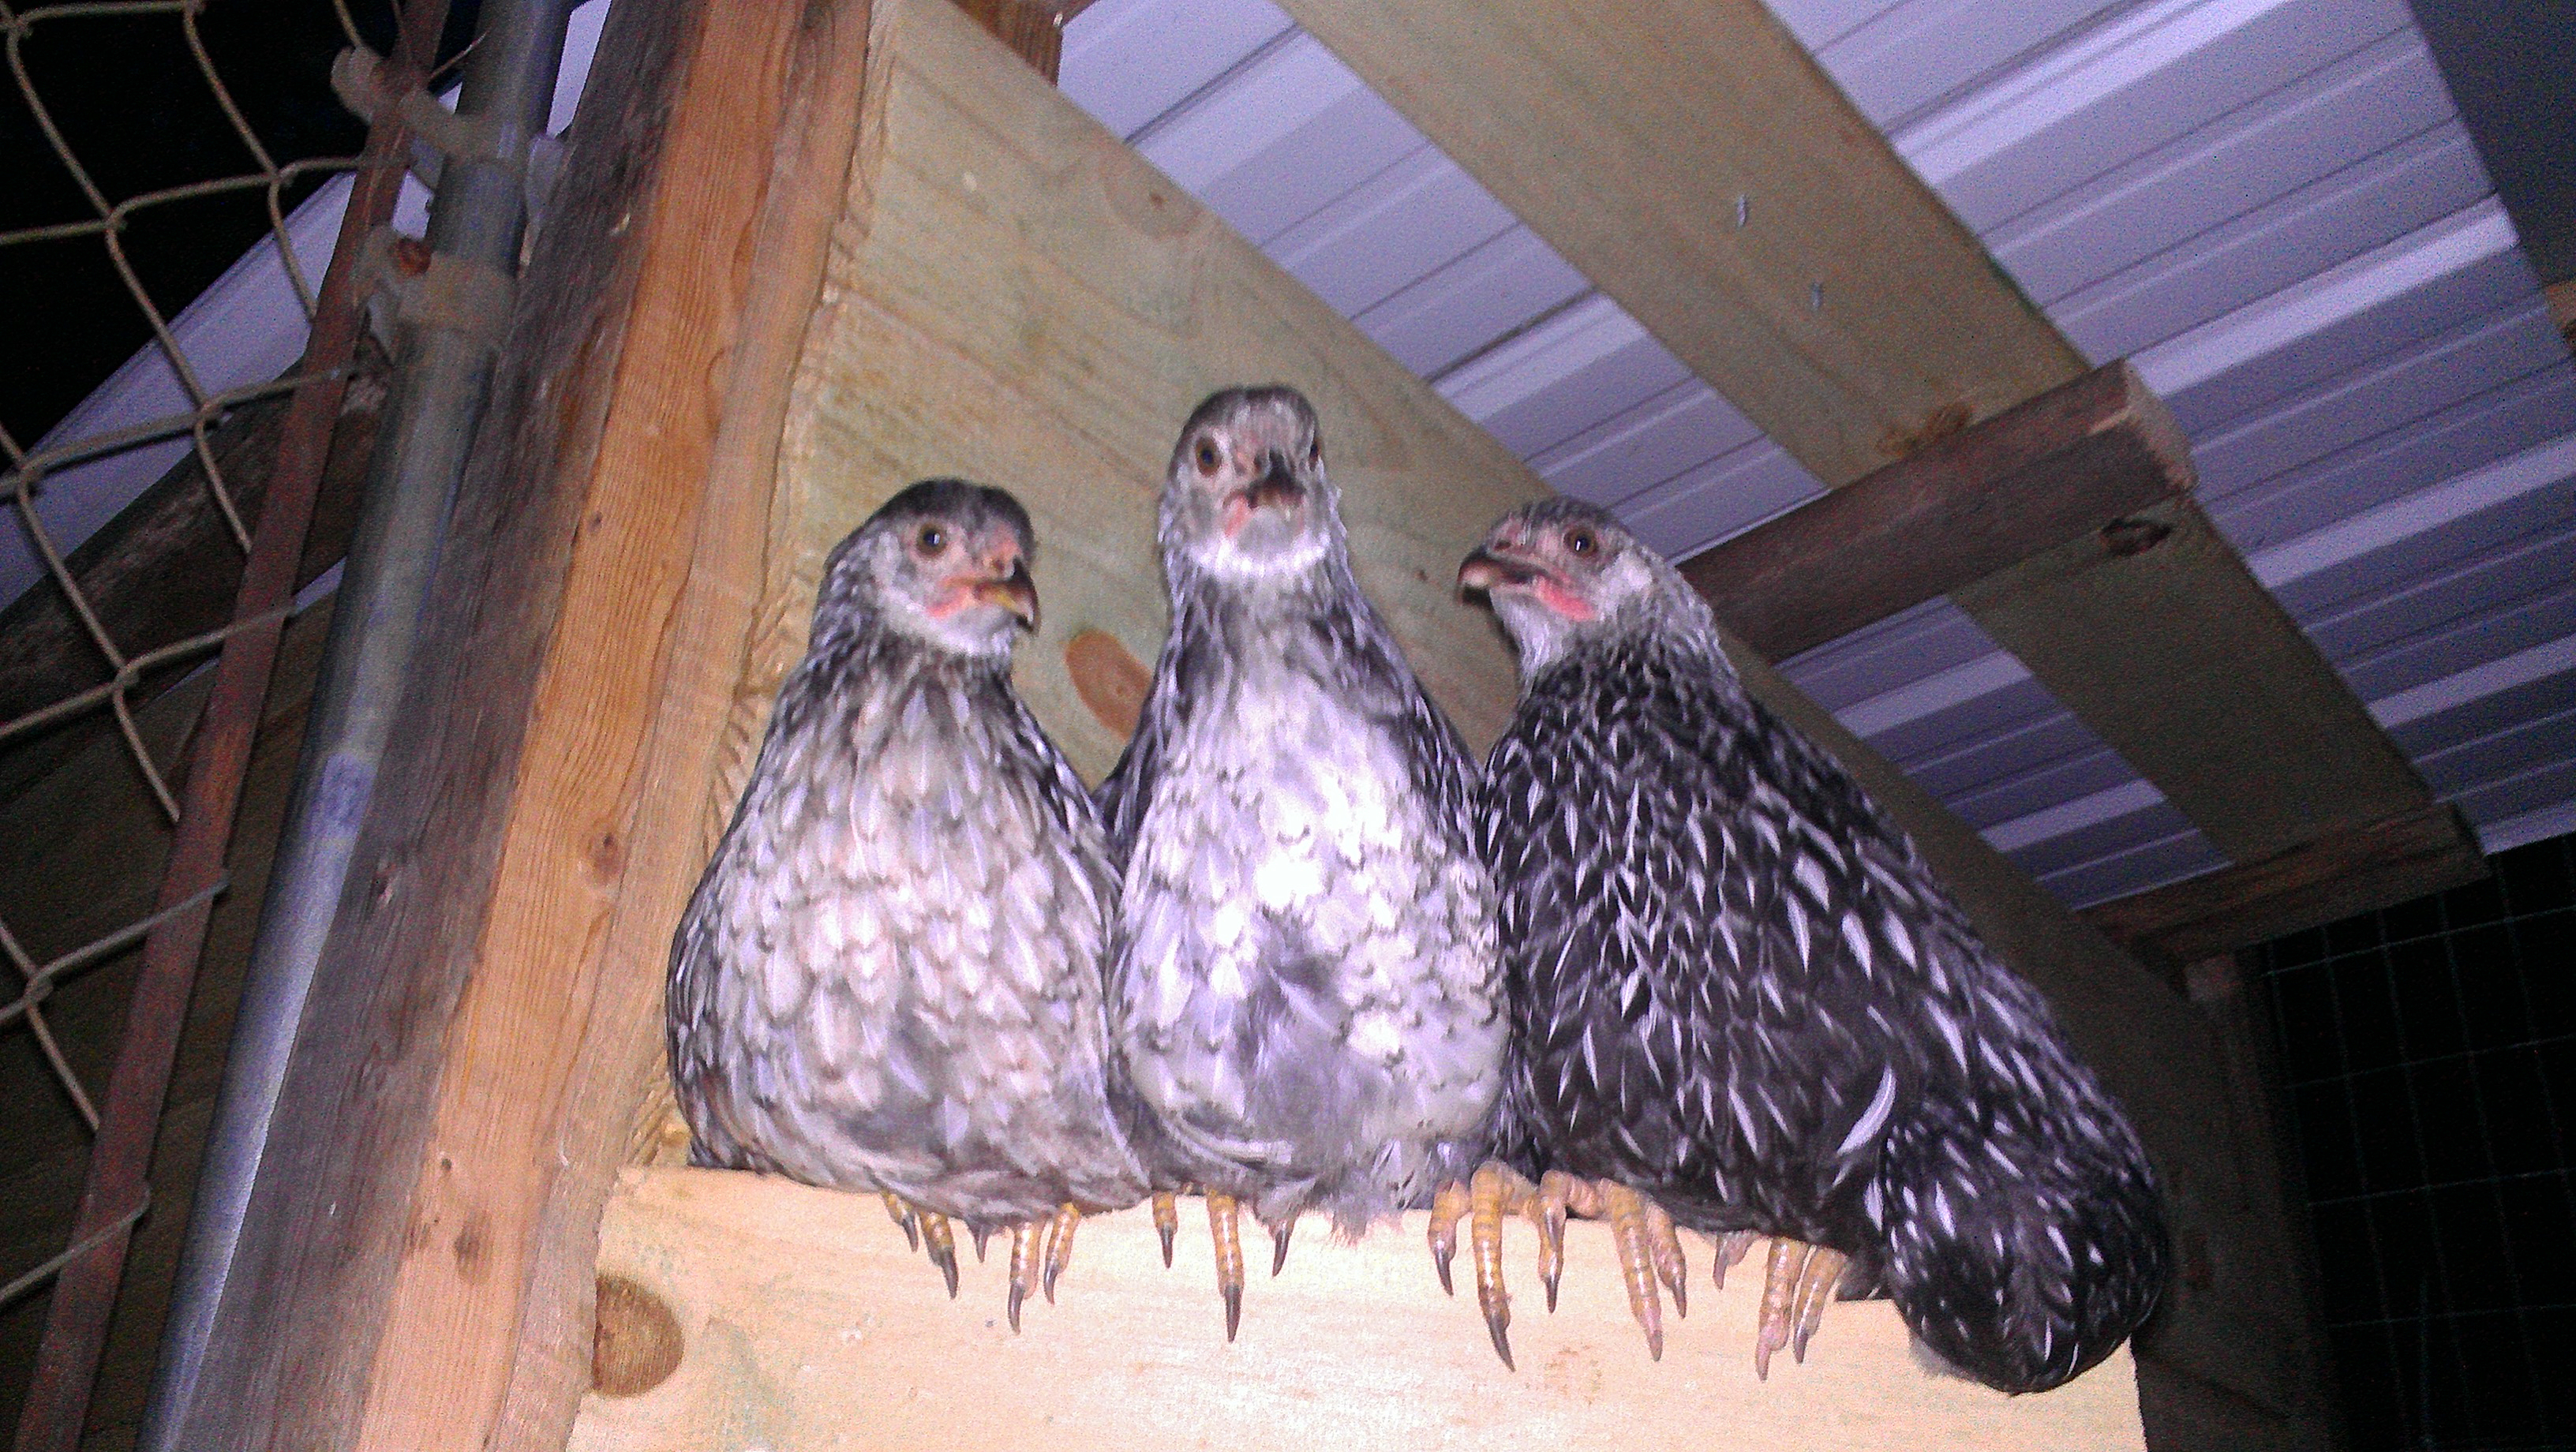 Our sweet babies at 8 weeks old.  So proud of them for learning to climb the ladder right into their coop in about 4 days!